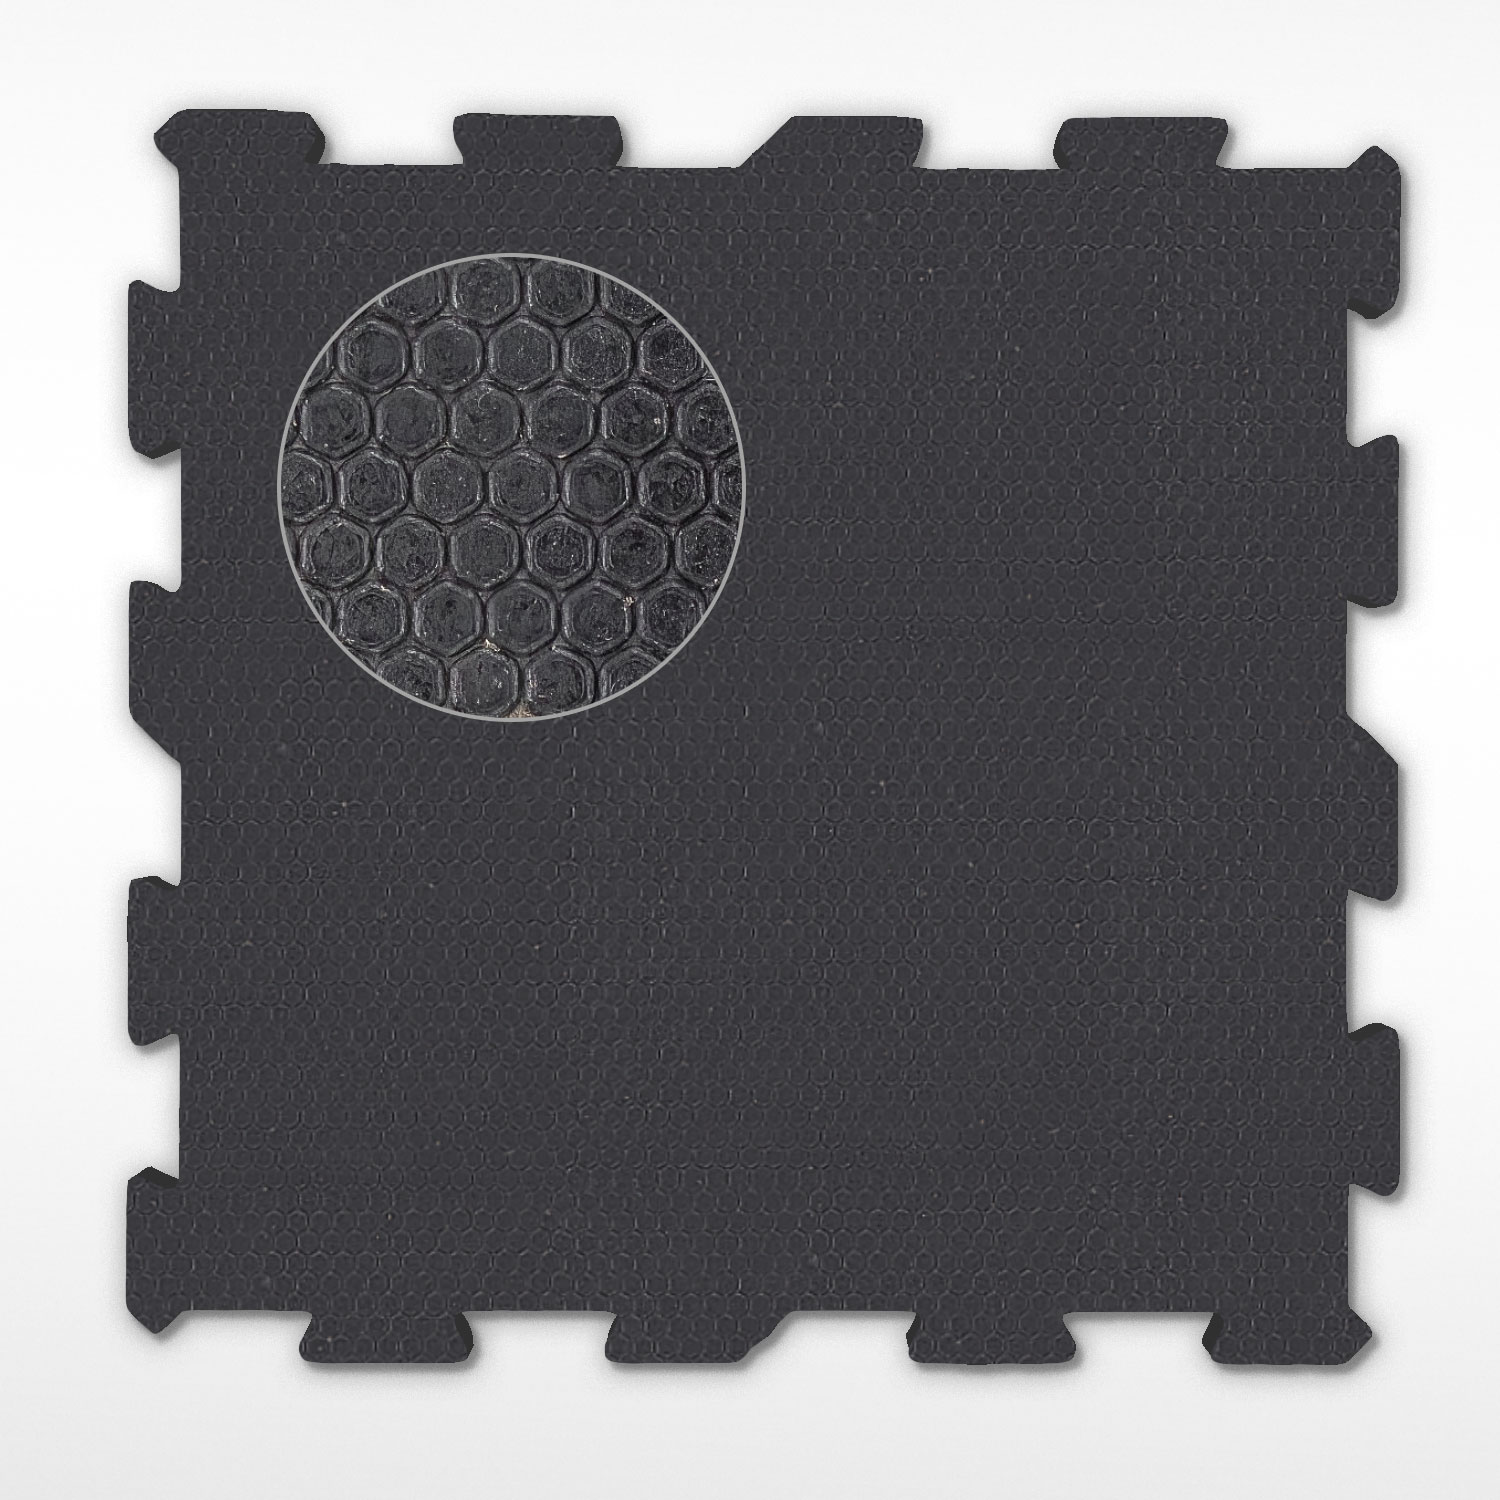 Heavy Duty Rubber Mats for Dog Daycare Flooring